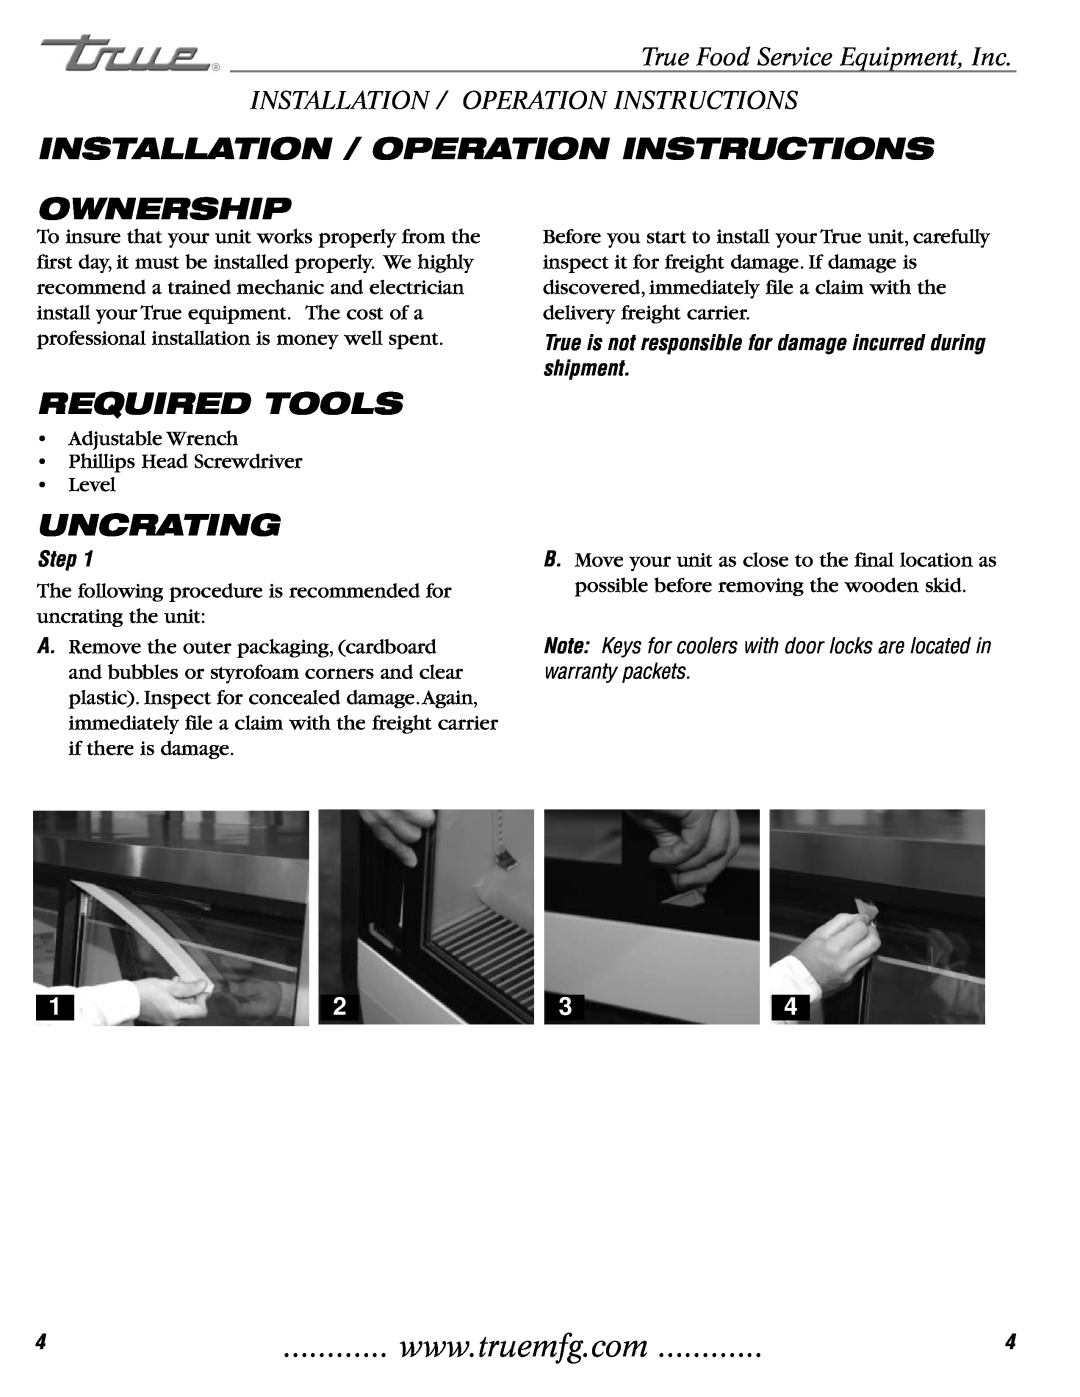 True Manufacturing Company TCGG-72-S Installation / Operation Instructions, Ownership, Required Tools, Uncrating, Step 